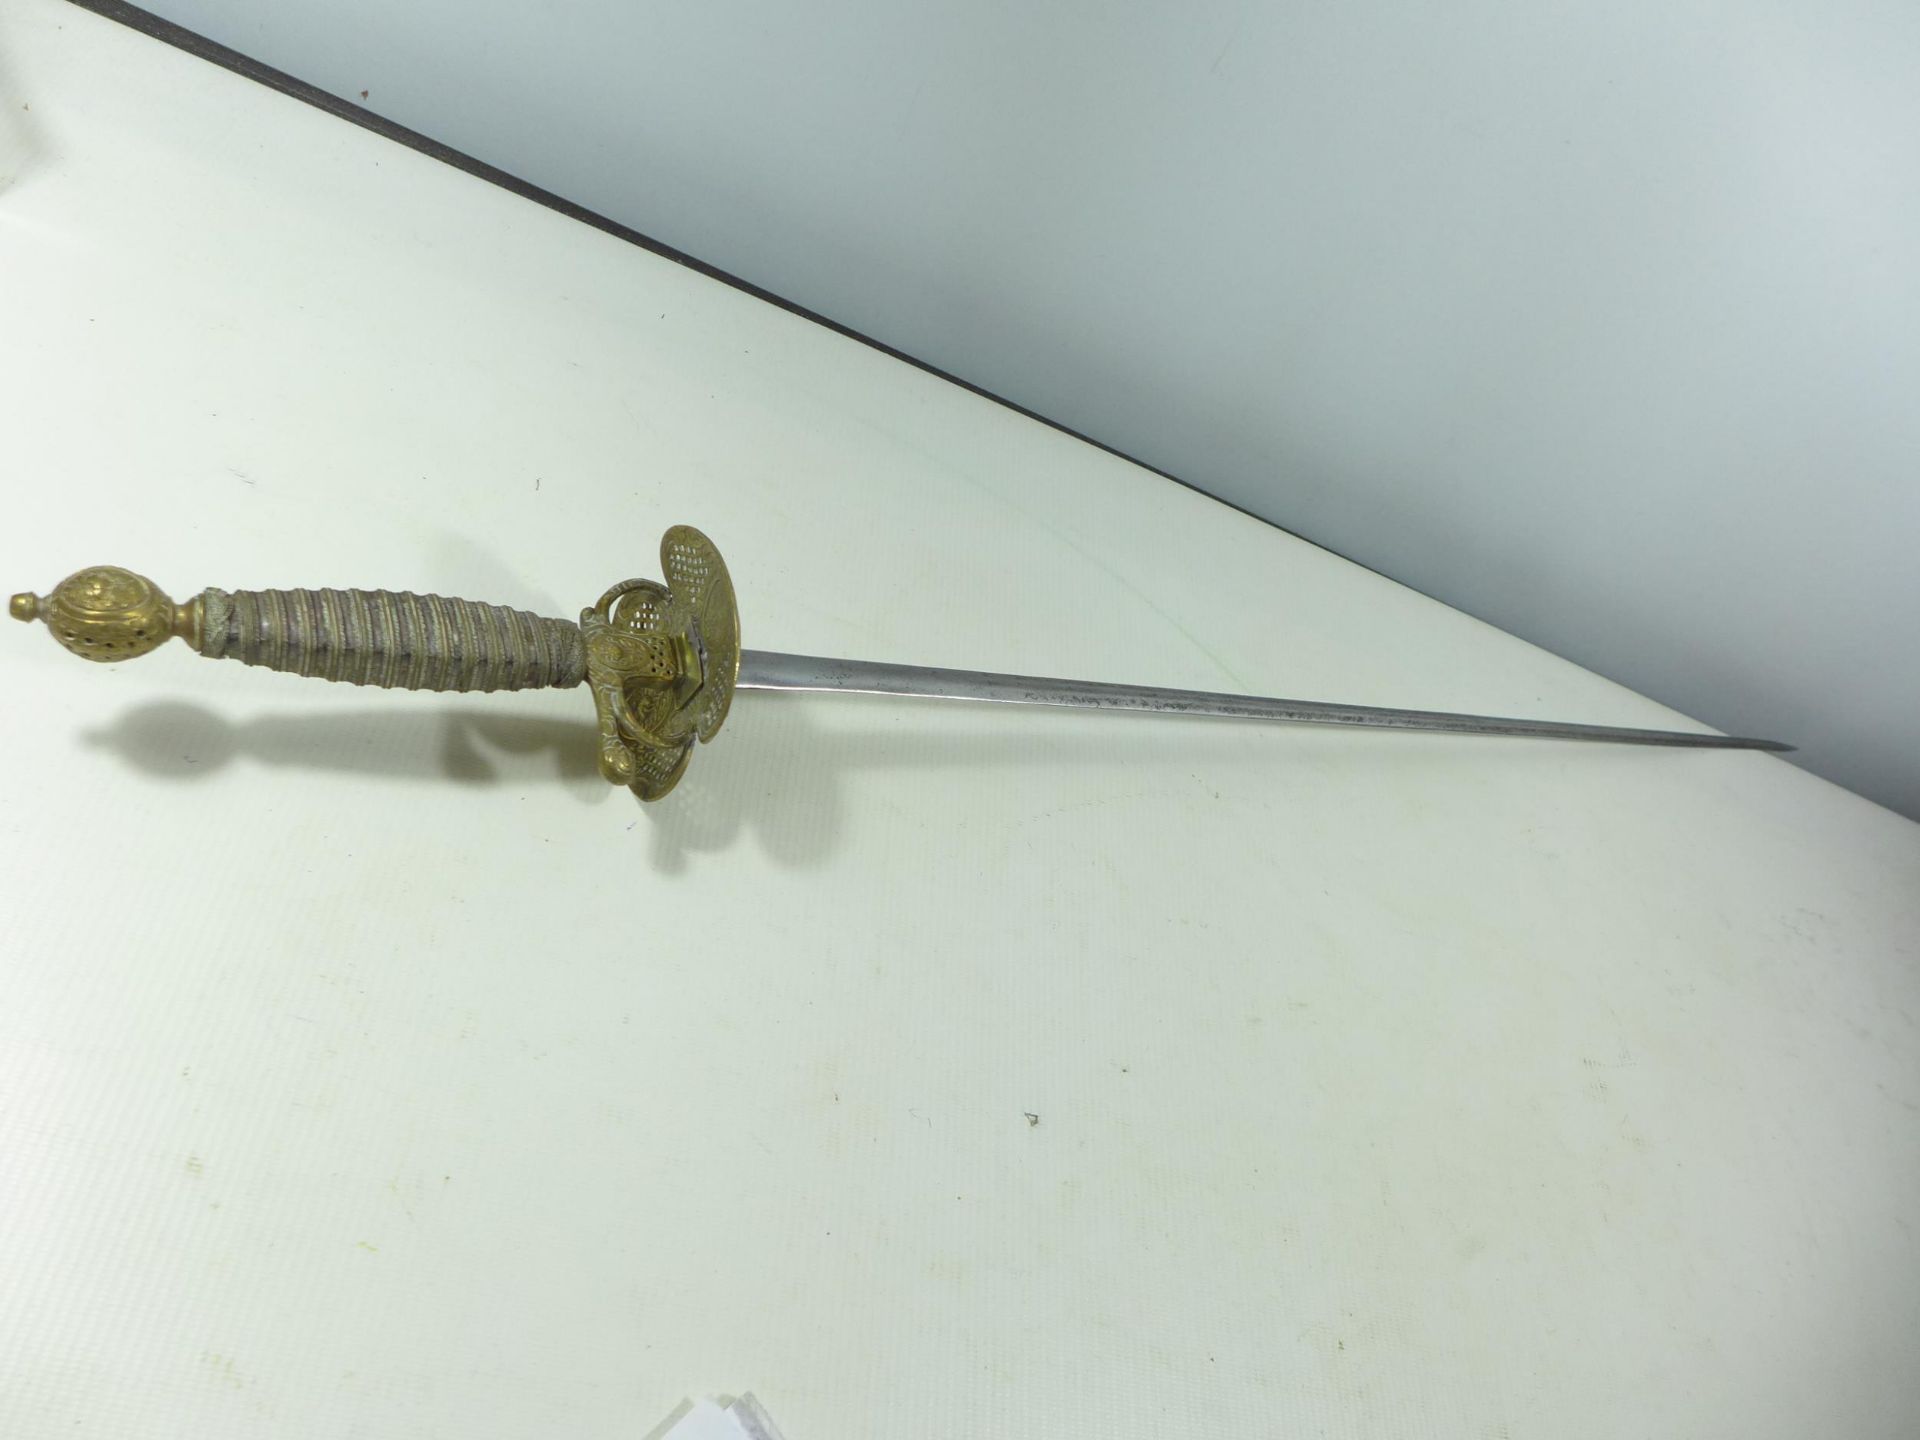 A LATE 18TH/EARLY 19TH CENTURY SMALLSWORD, 73CM BLADE, PIERCED BRASS GUARD, WHITE METAL GRIP, A/F